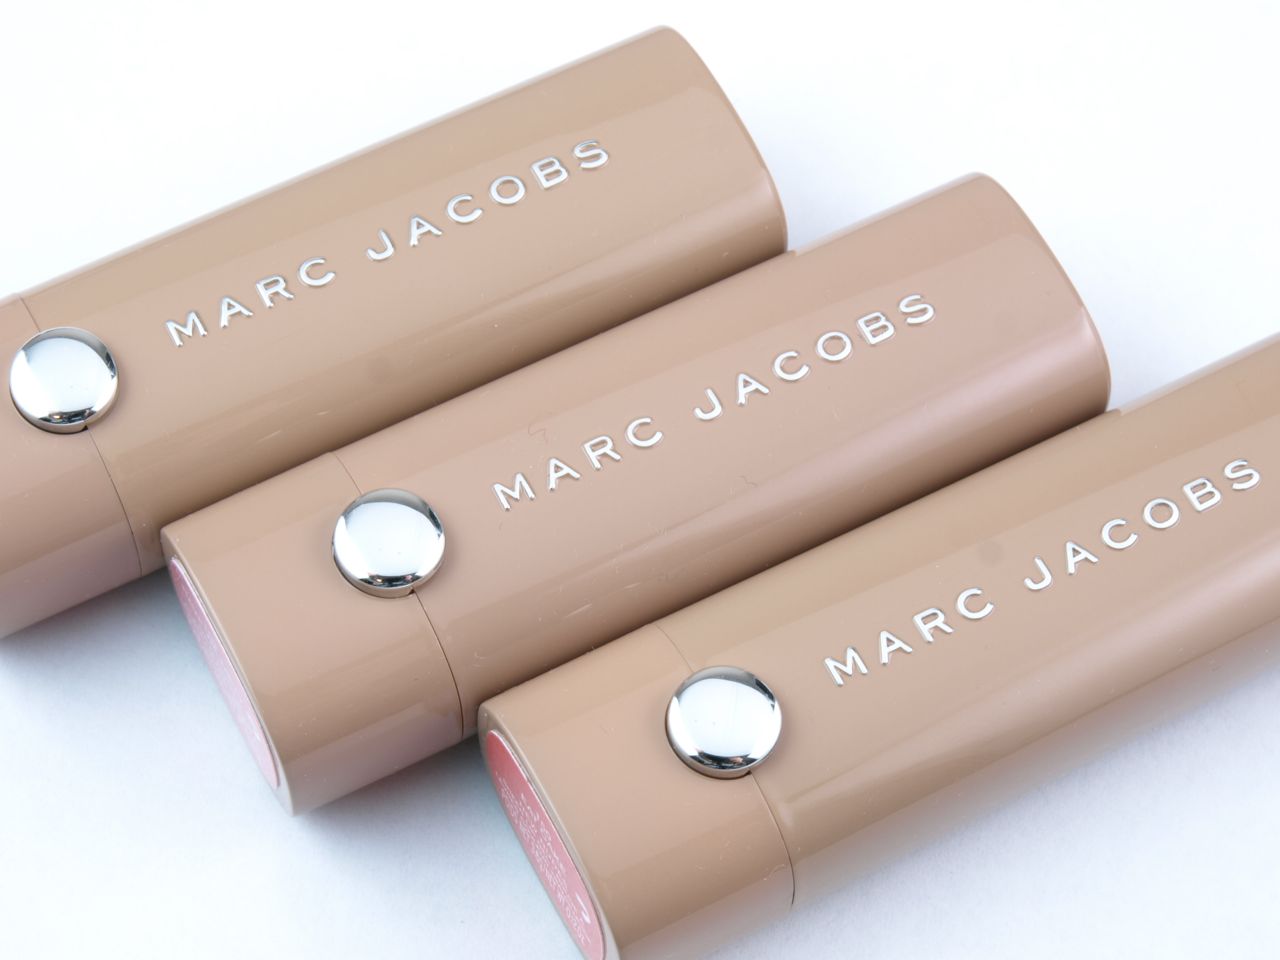 Marc Jacobs New Nudes Sheer Lip Gel in "108 Moody Margot", "150 Eat Cake" & "108 Have We Met?": Review and Swatches